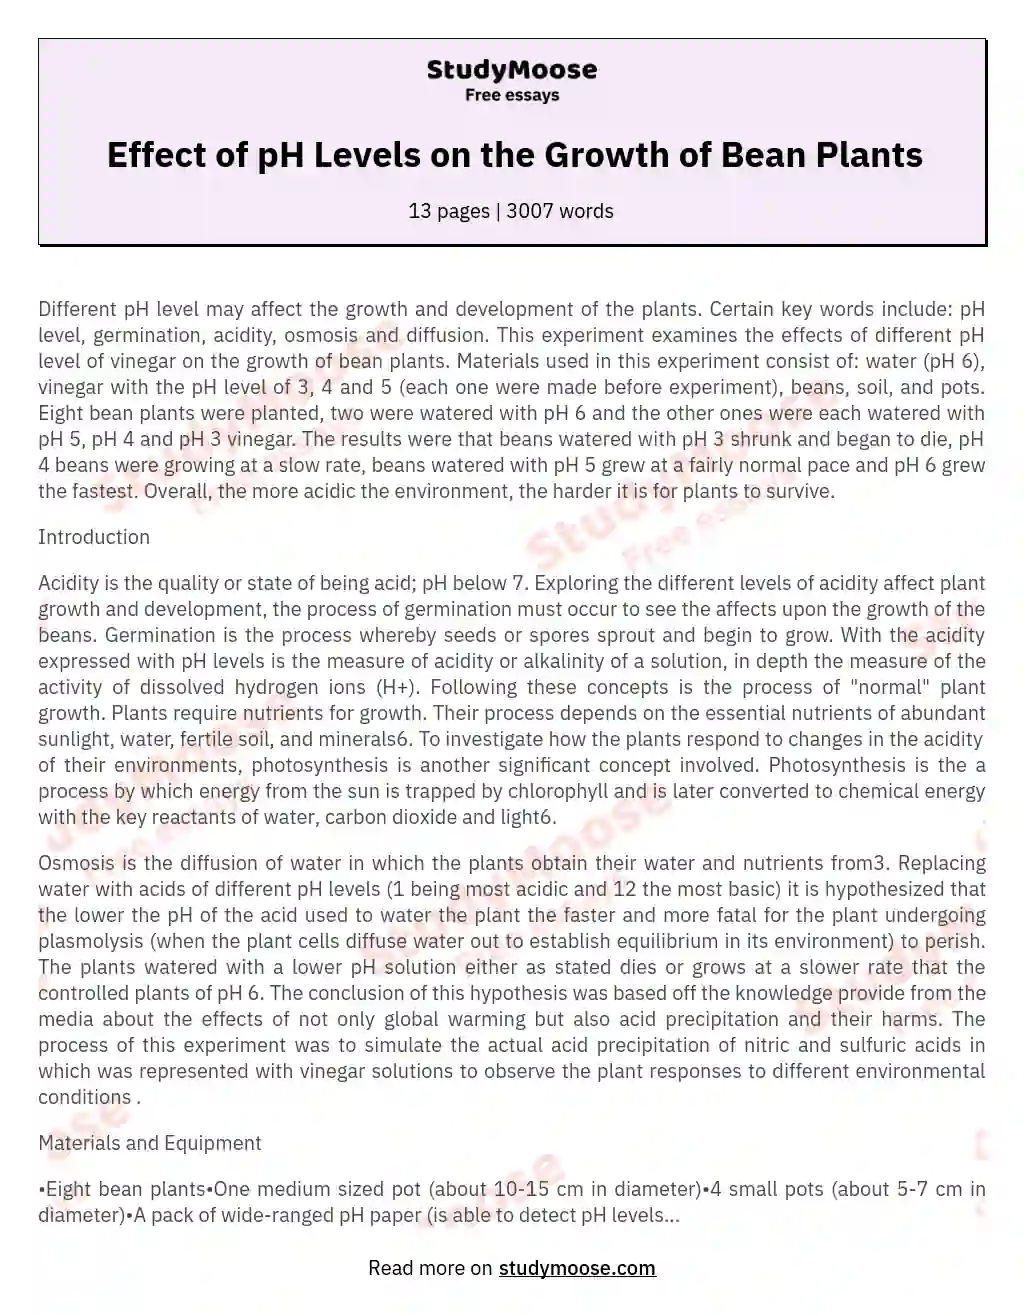 Effect of pH Levels on the Growth of Bean Plants essay